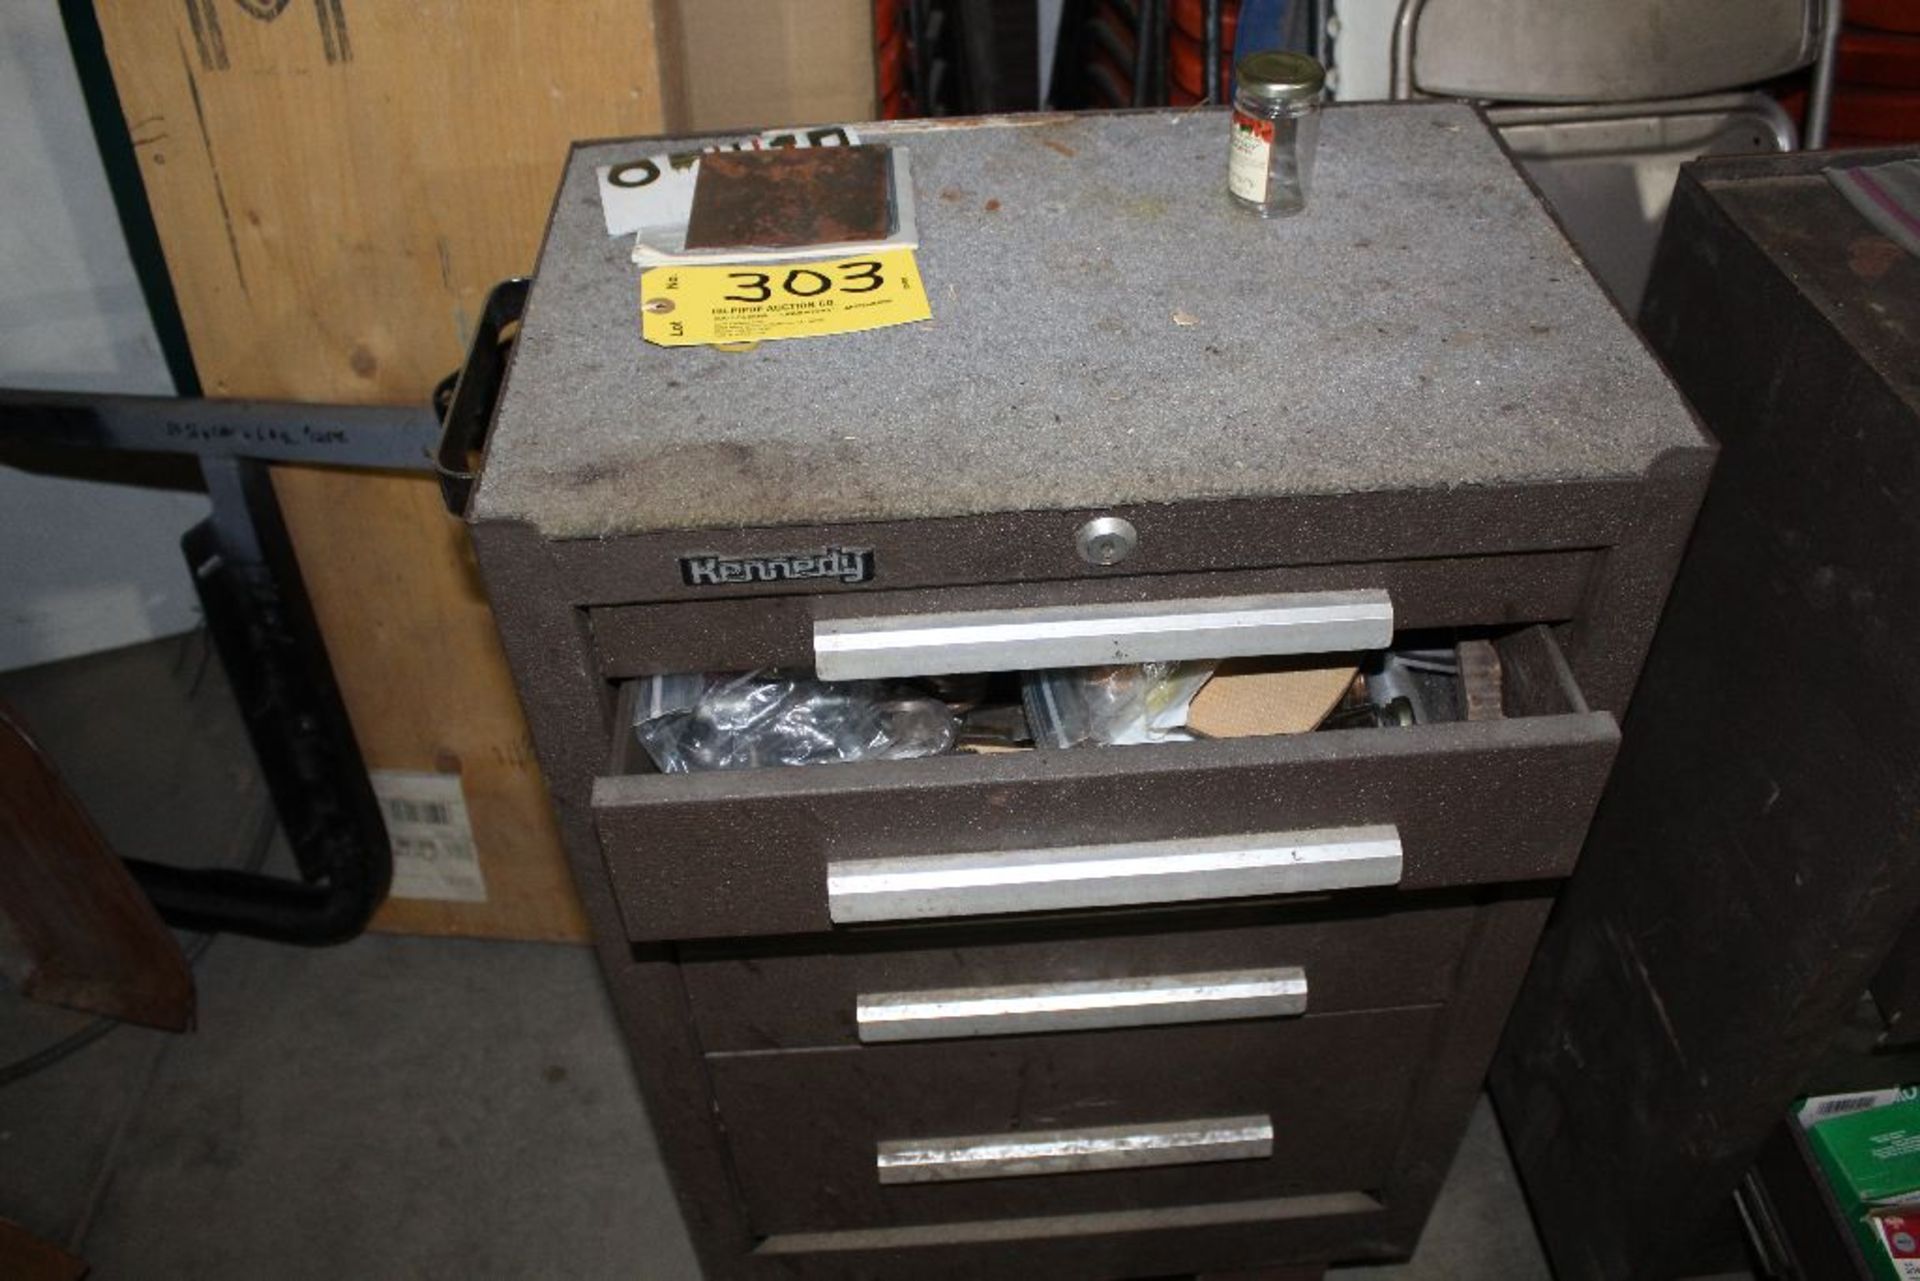 Kennedy 5 drawer tool chest; 20 1/2" x 14" x 35", rollaround cabinet, w/contents (tooling).